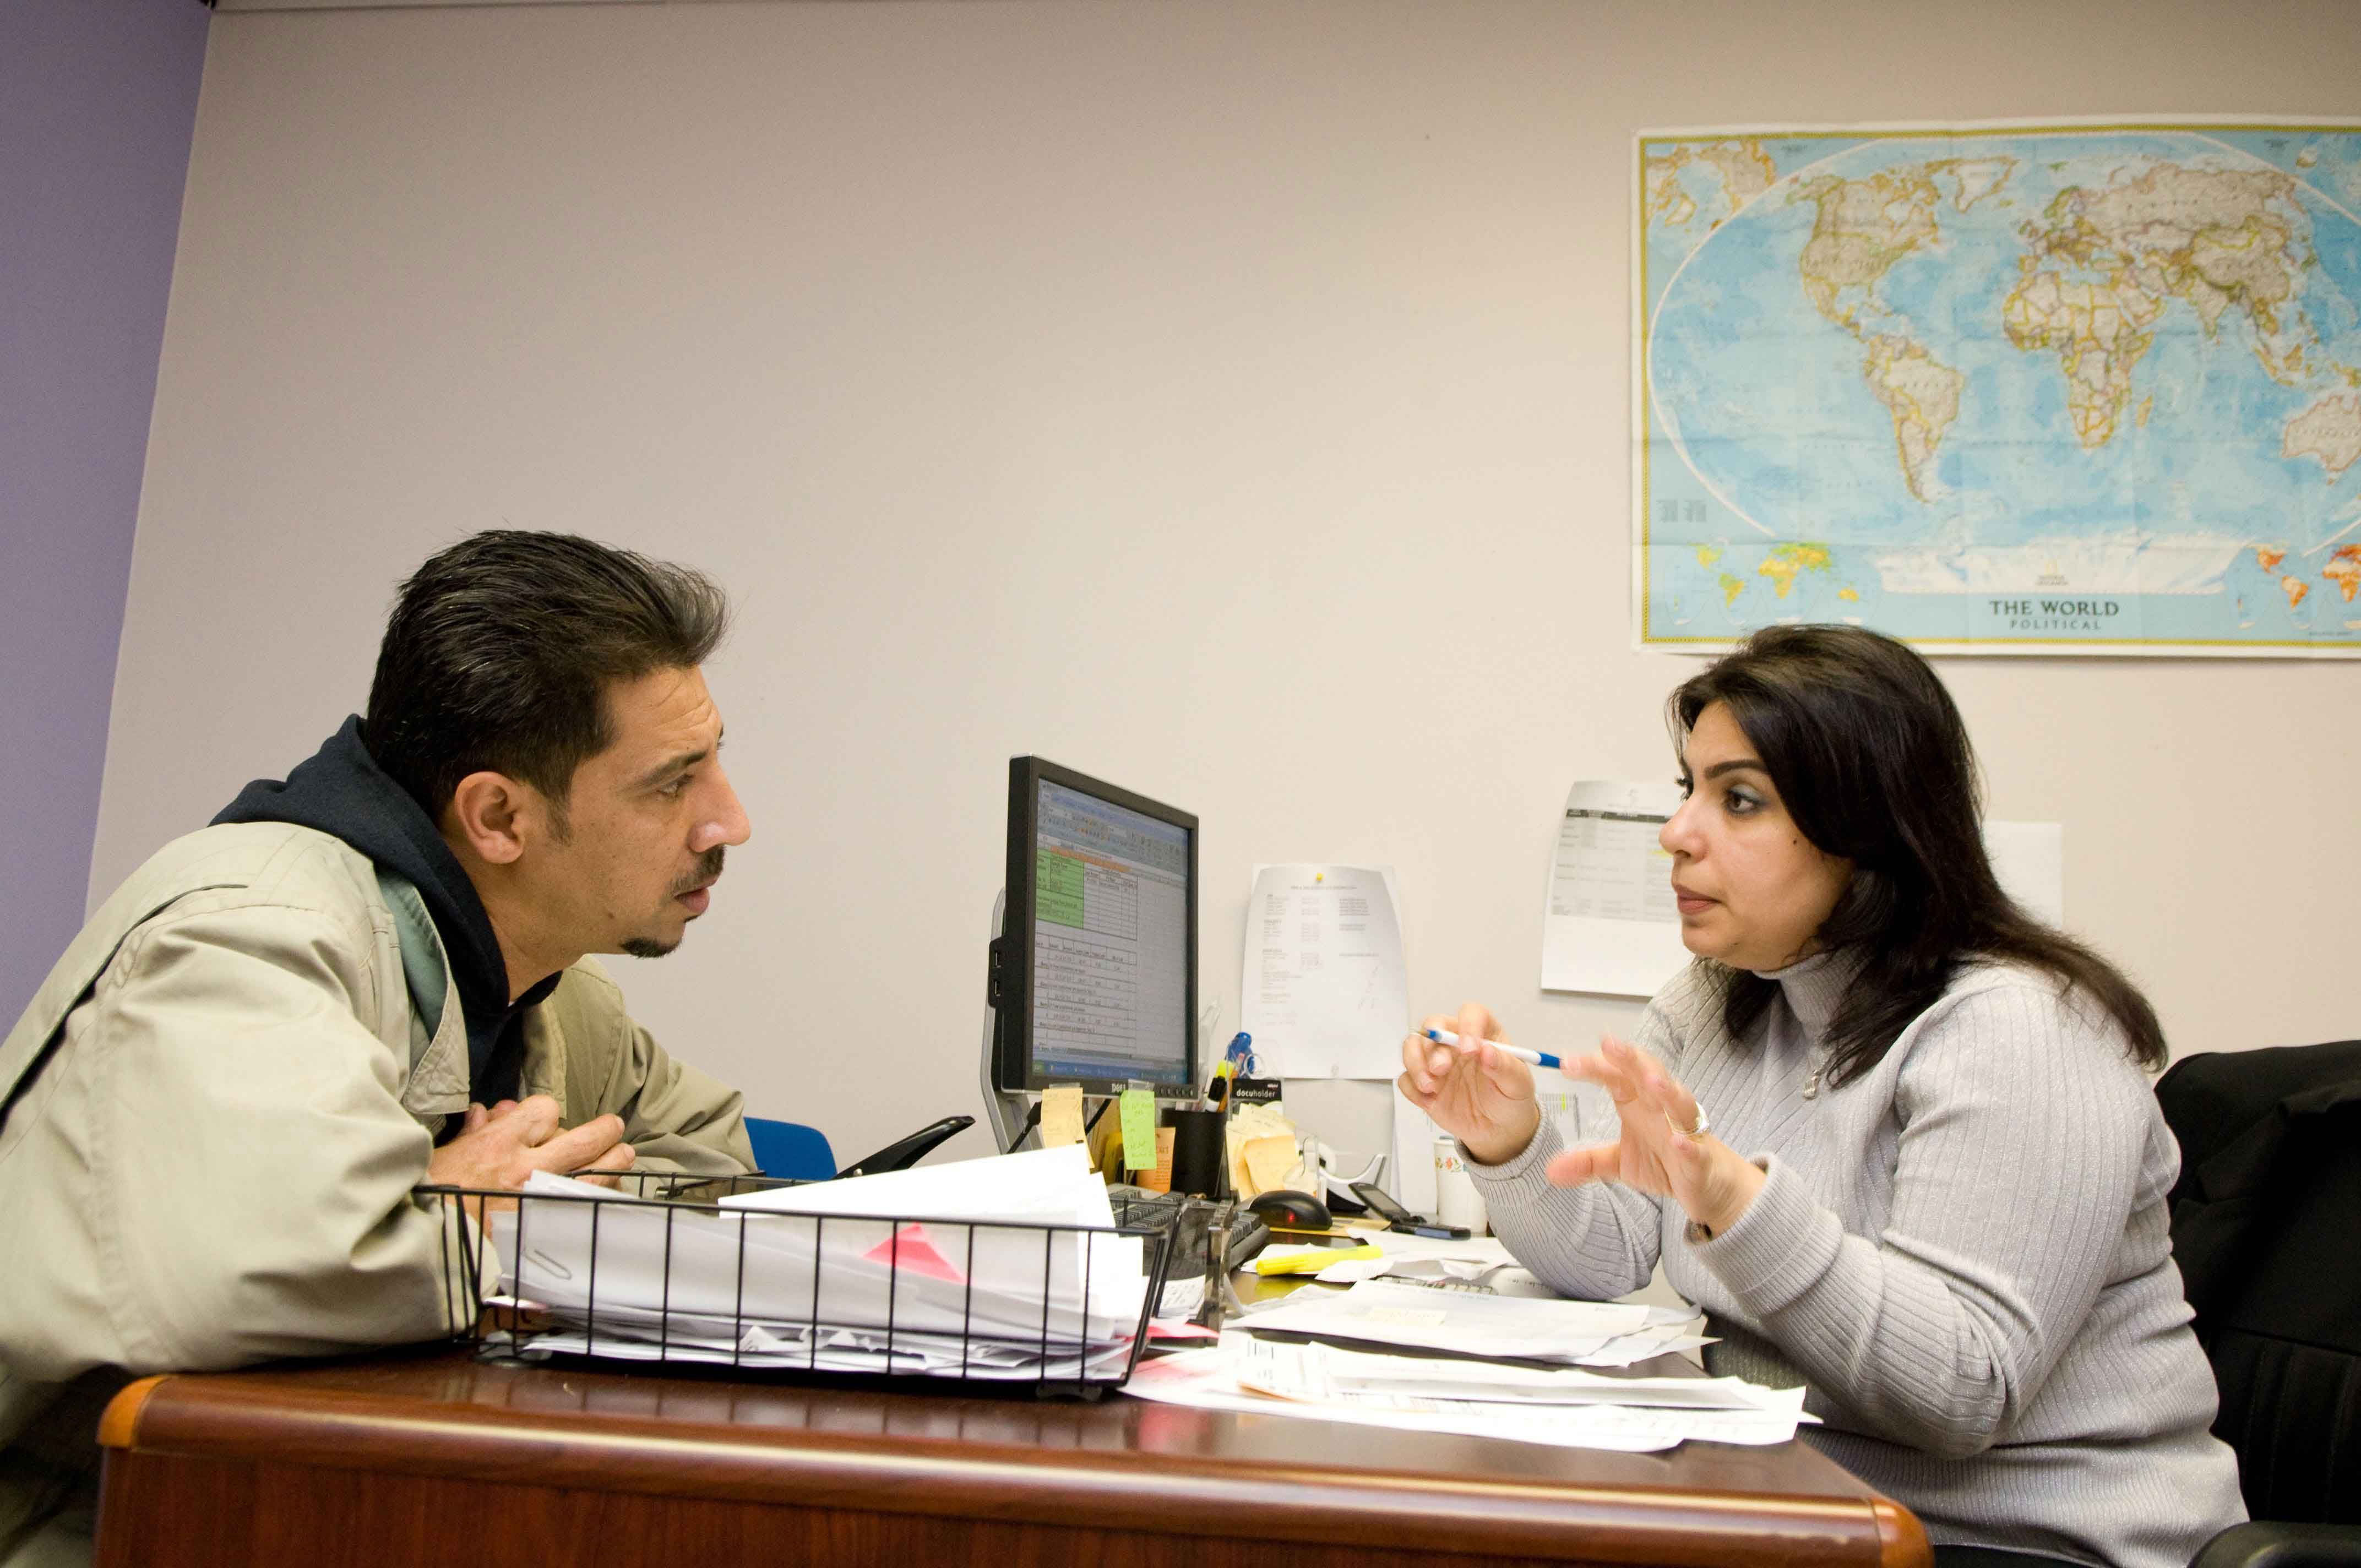 A resettlement case worker helping a refugee learn about life in the U.S.